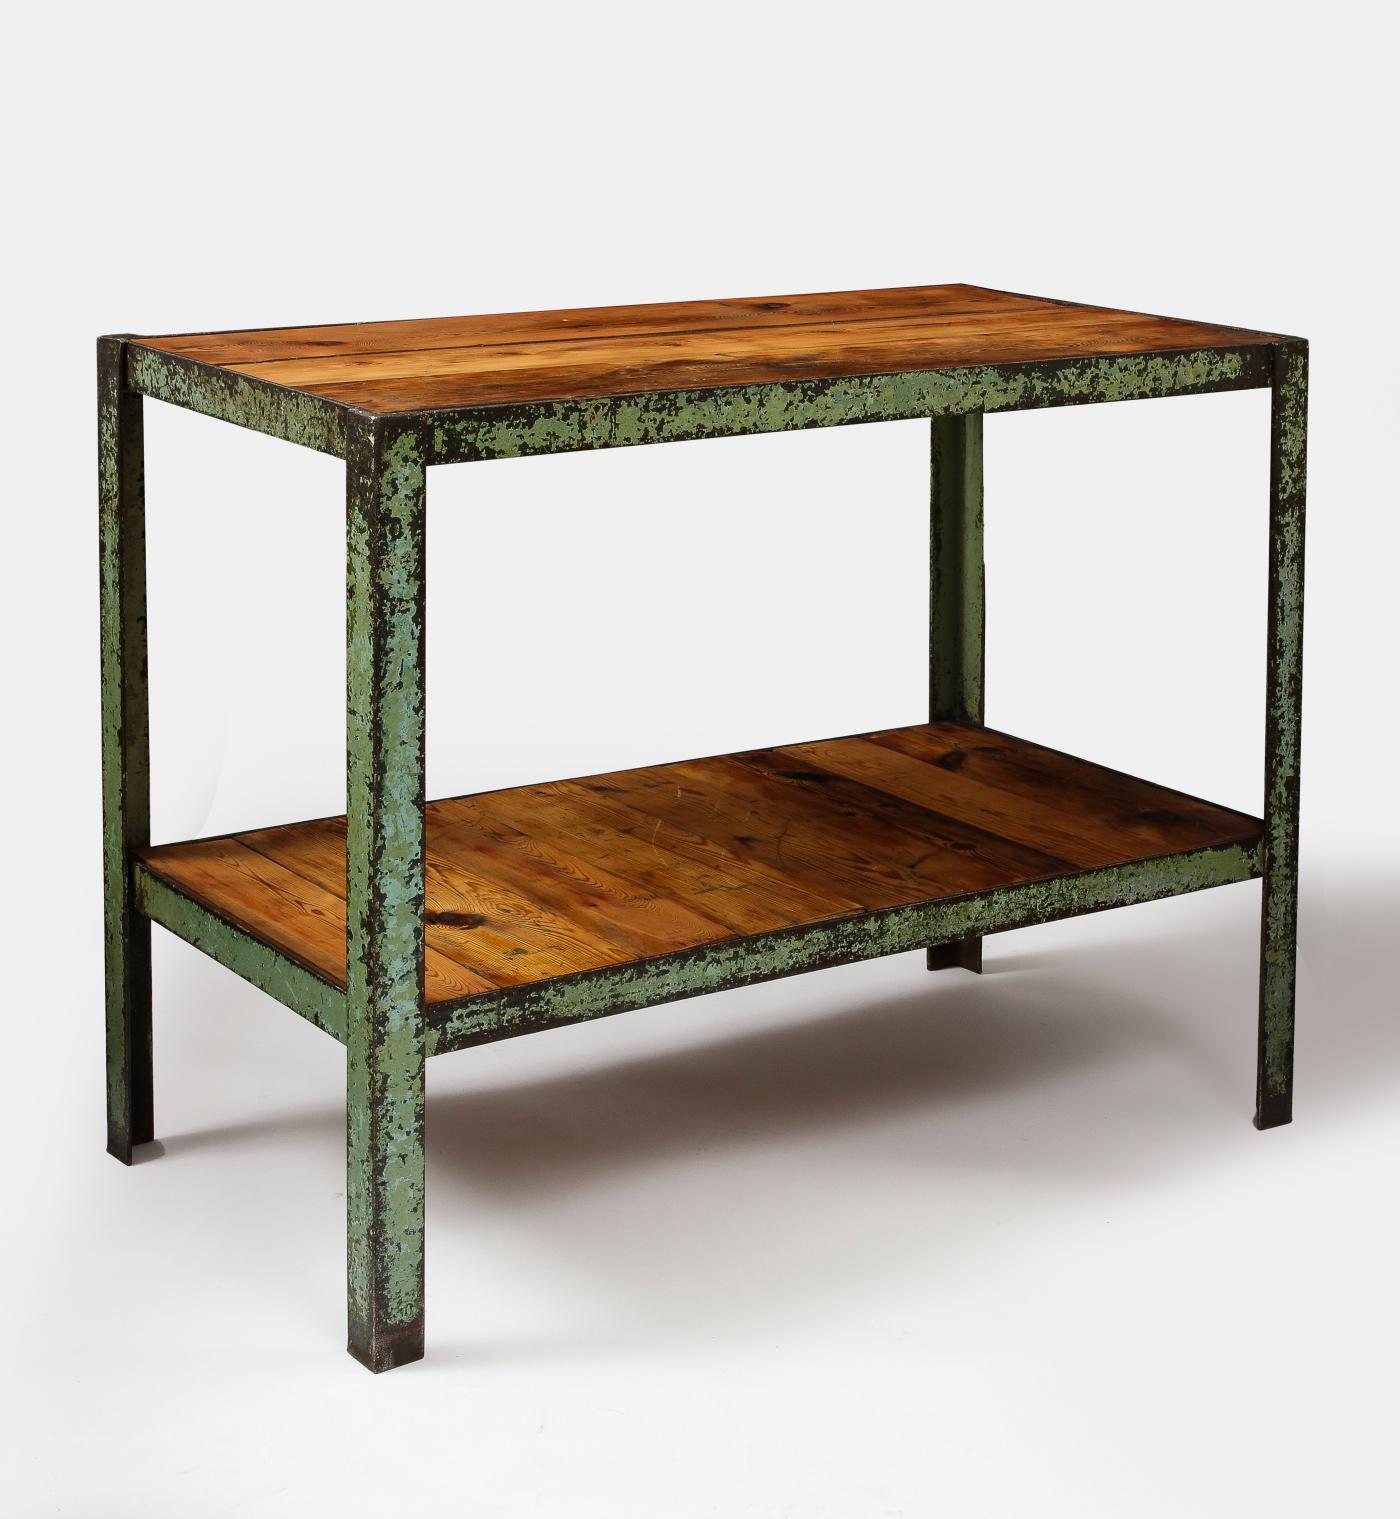 Patinated Metal and European Pine Industrial Side Table/Console with Shelf

Striking industrial shelf with traces of light green paint on the solidly welded angle iron. The wood used on the shelves is hefty, strong European pine, which will only